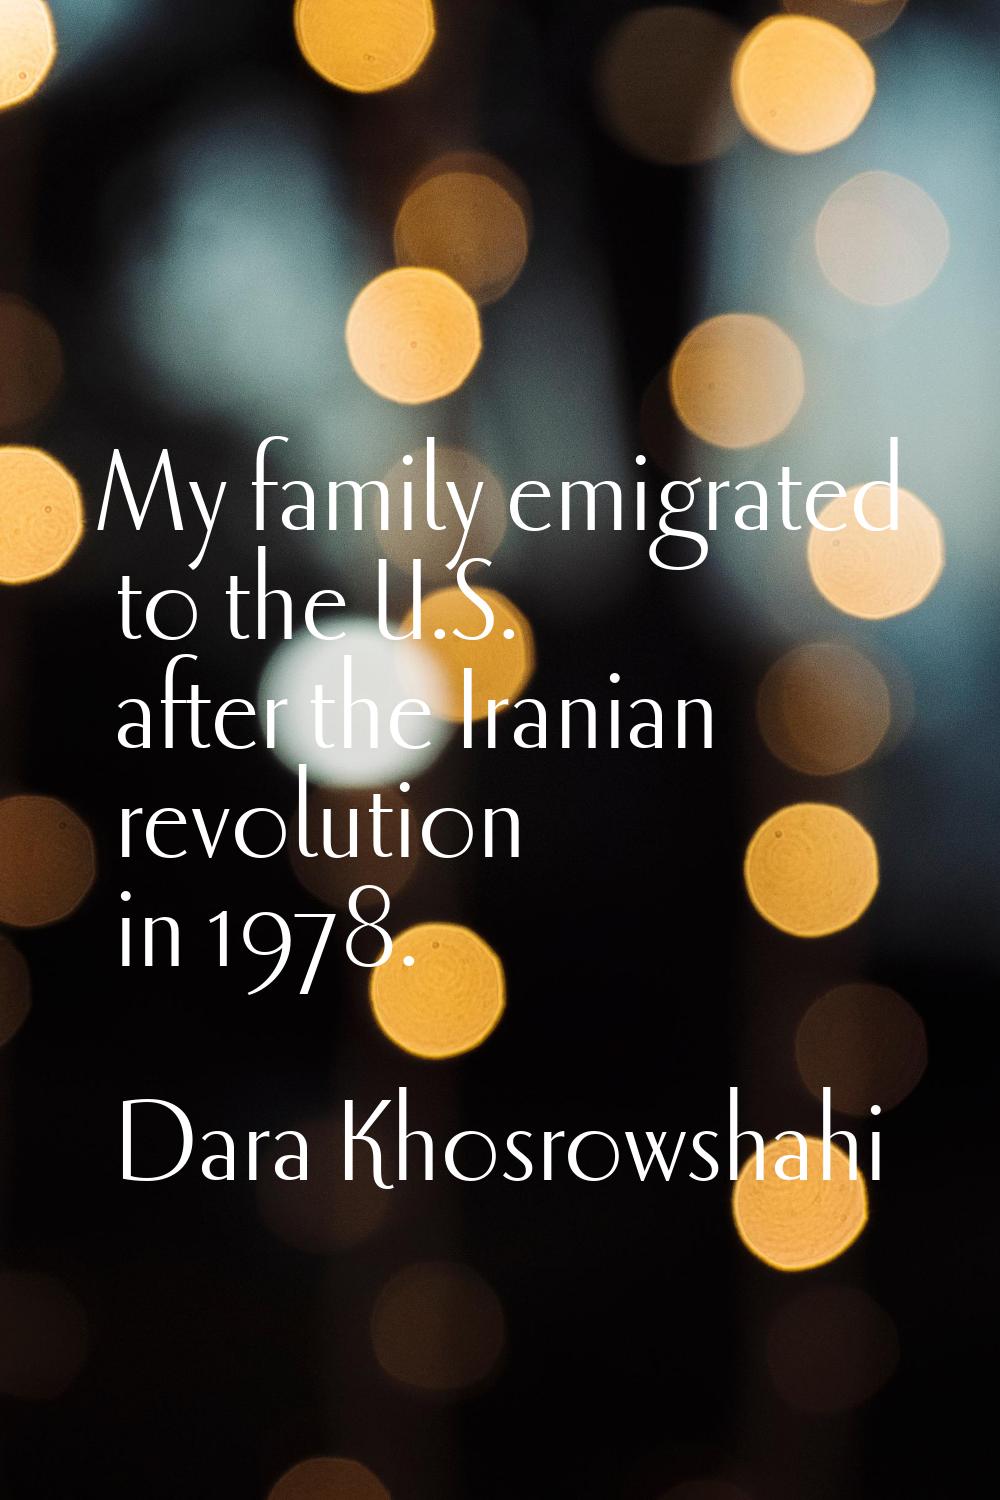 My family emigrated to the U.S. after the Iranian revolution in 1978.